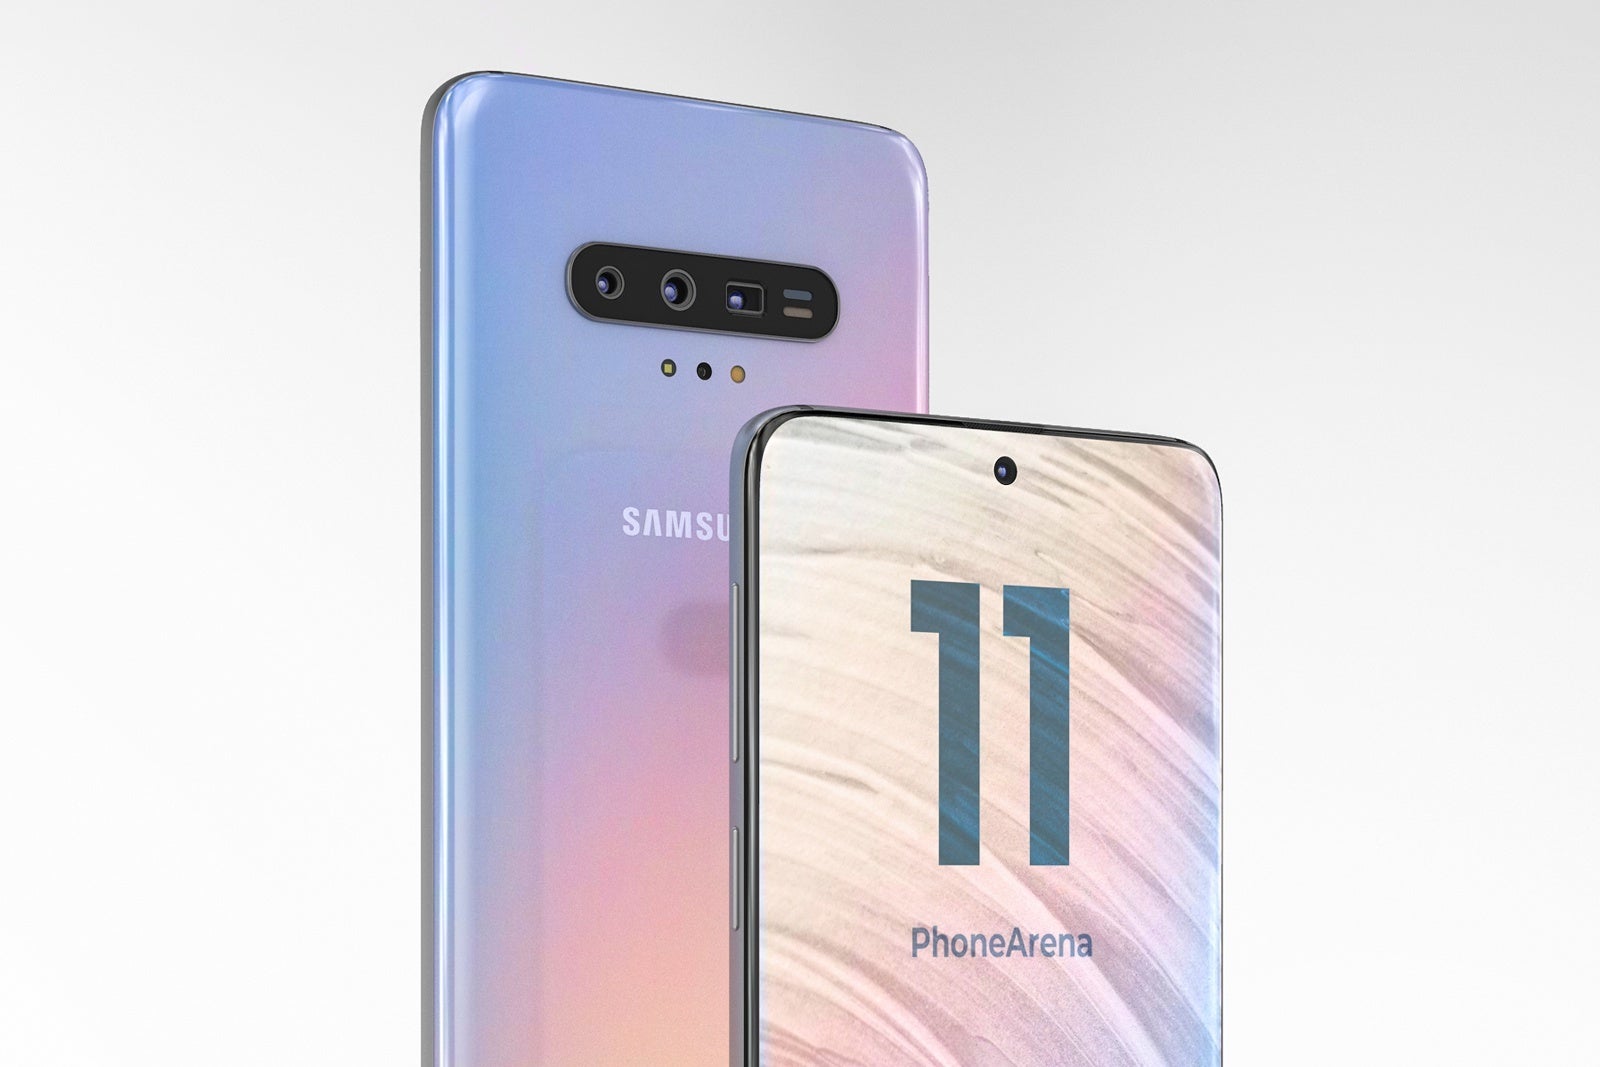 Galaxy S11 concept - Galaxy S11 Lite-type phone could join that affordable Galaxy Note device to market soon